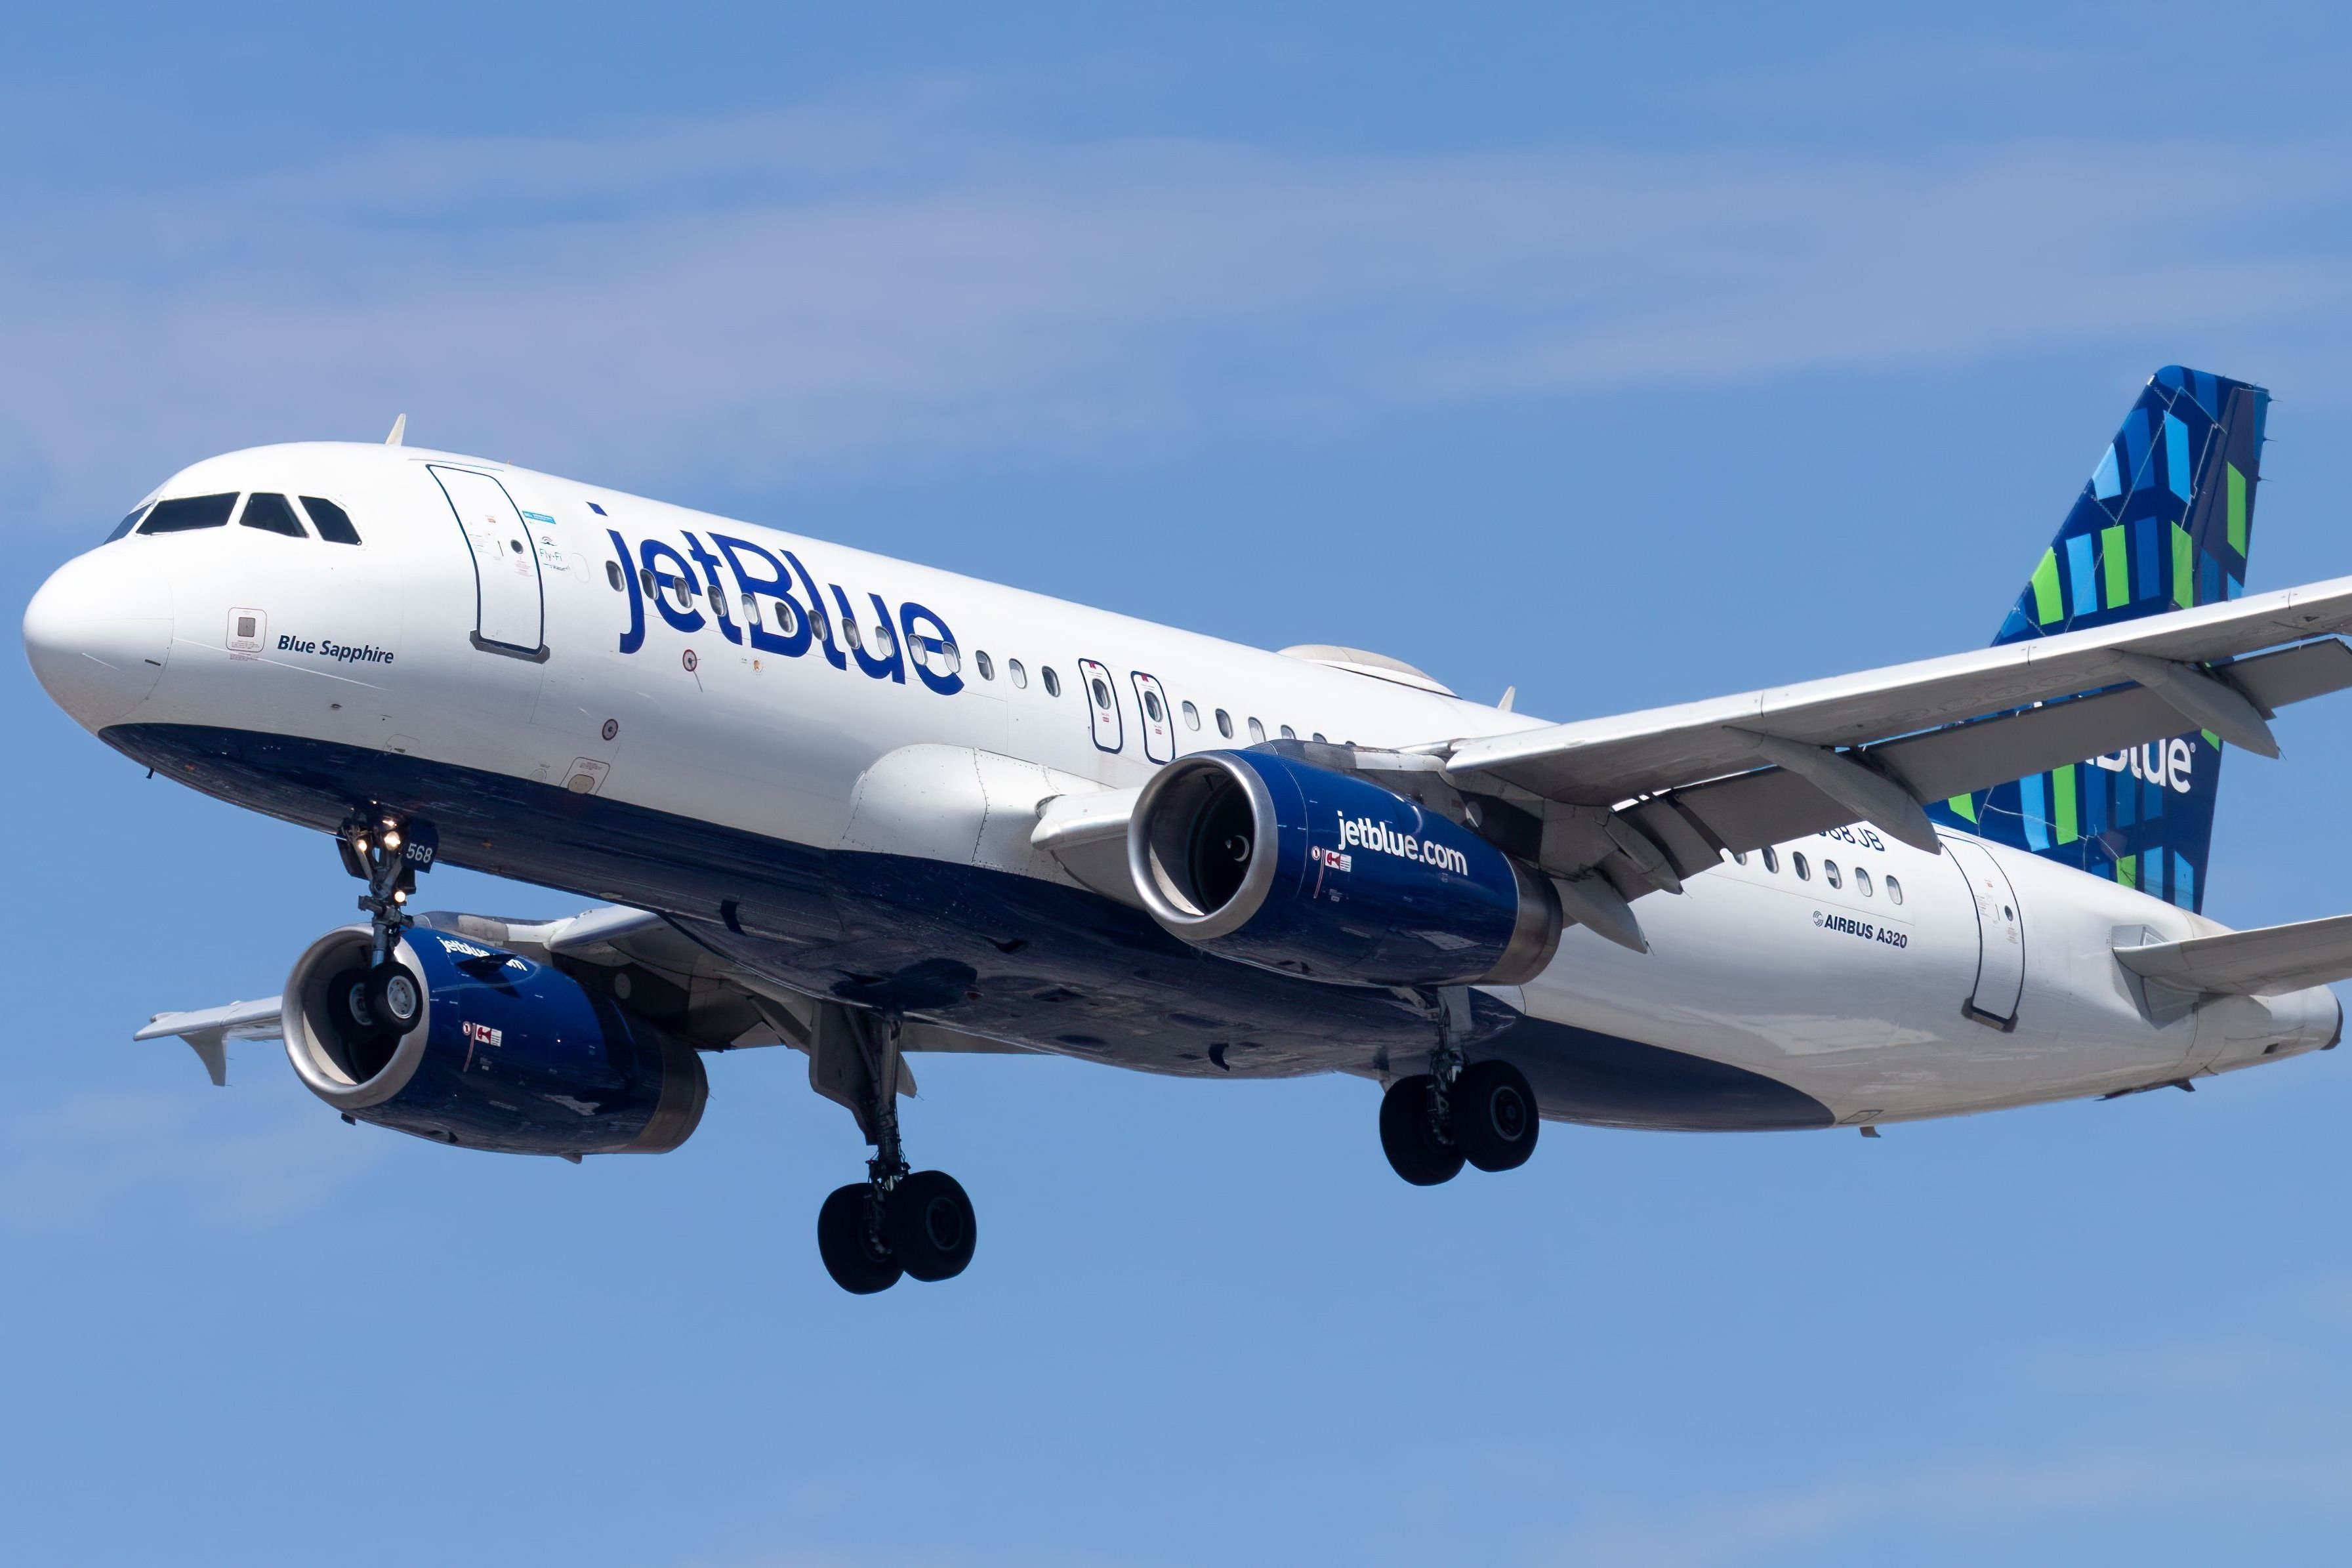 LOS ANGELES, US - Sep 03, 2022: A JetBlue Airlines aircraft soaring against a blue sky backdrop.